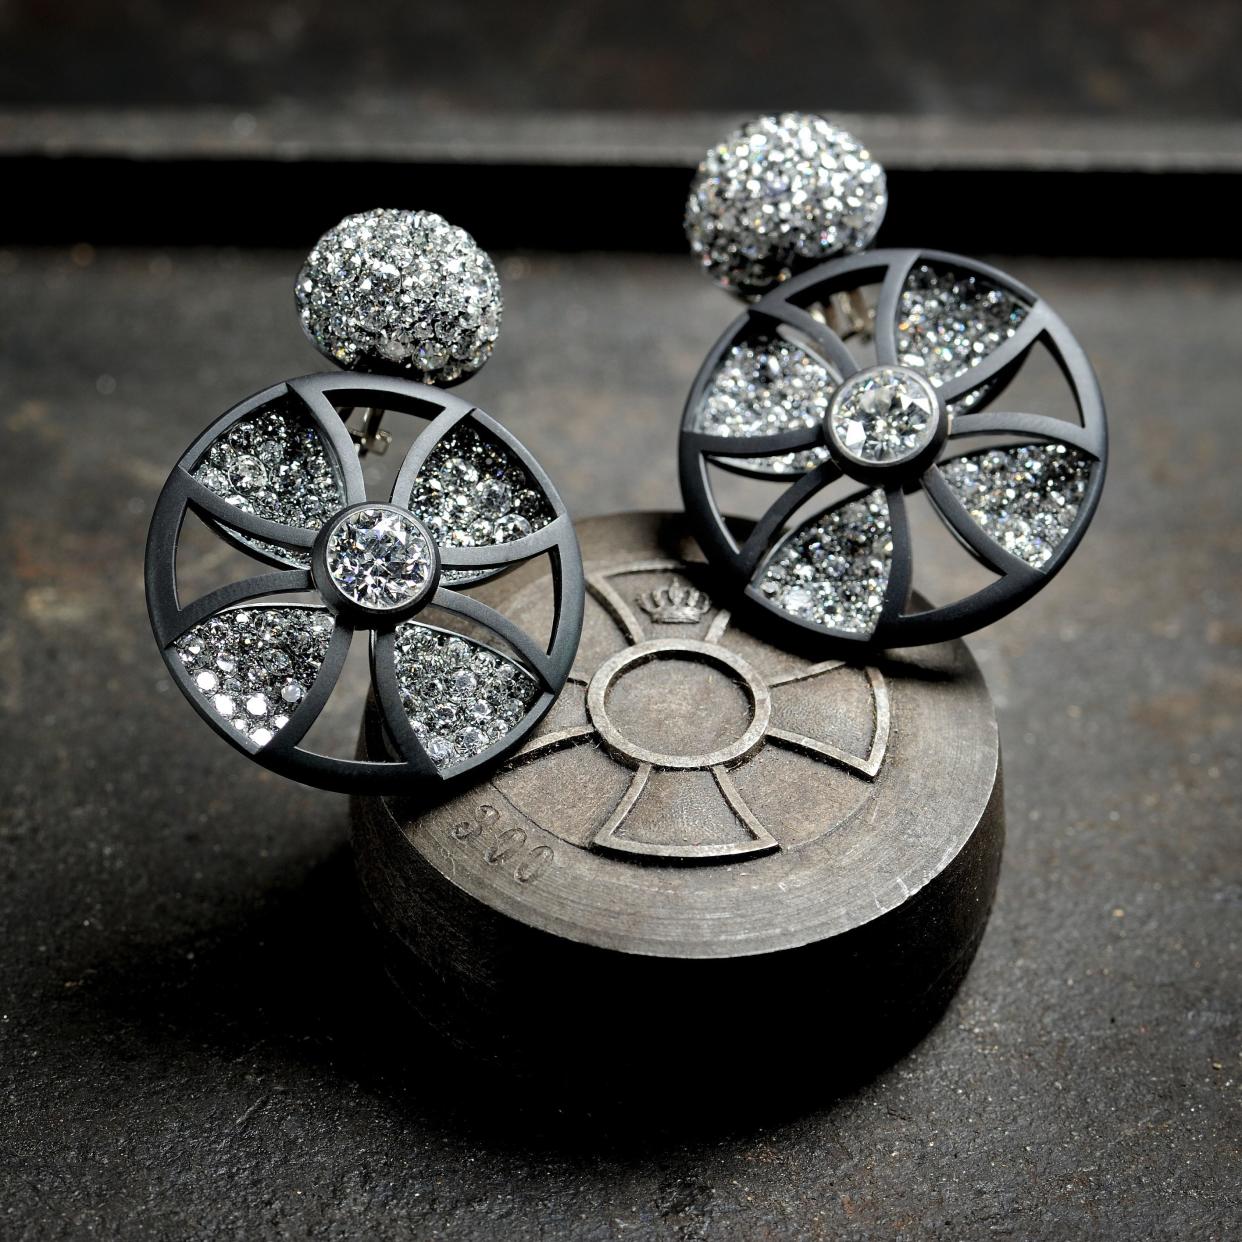 Diamond, blackened silver and white gold earrings by Hemmerle -